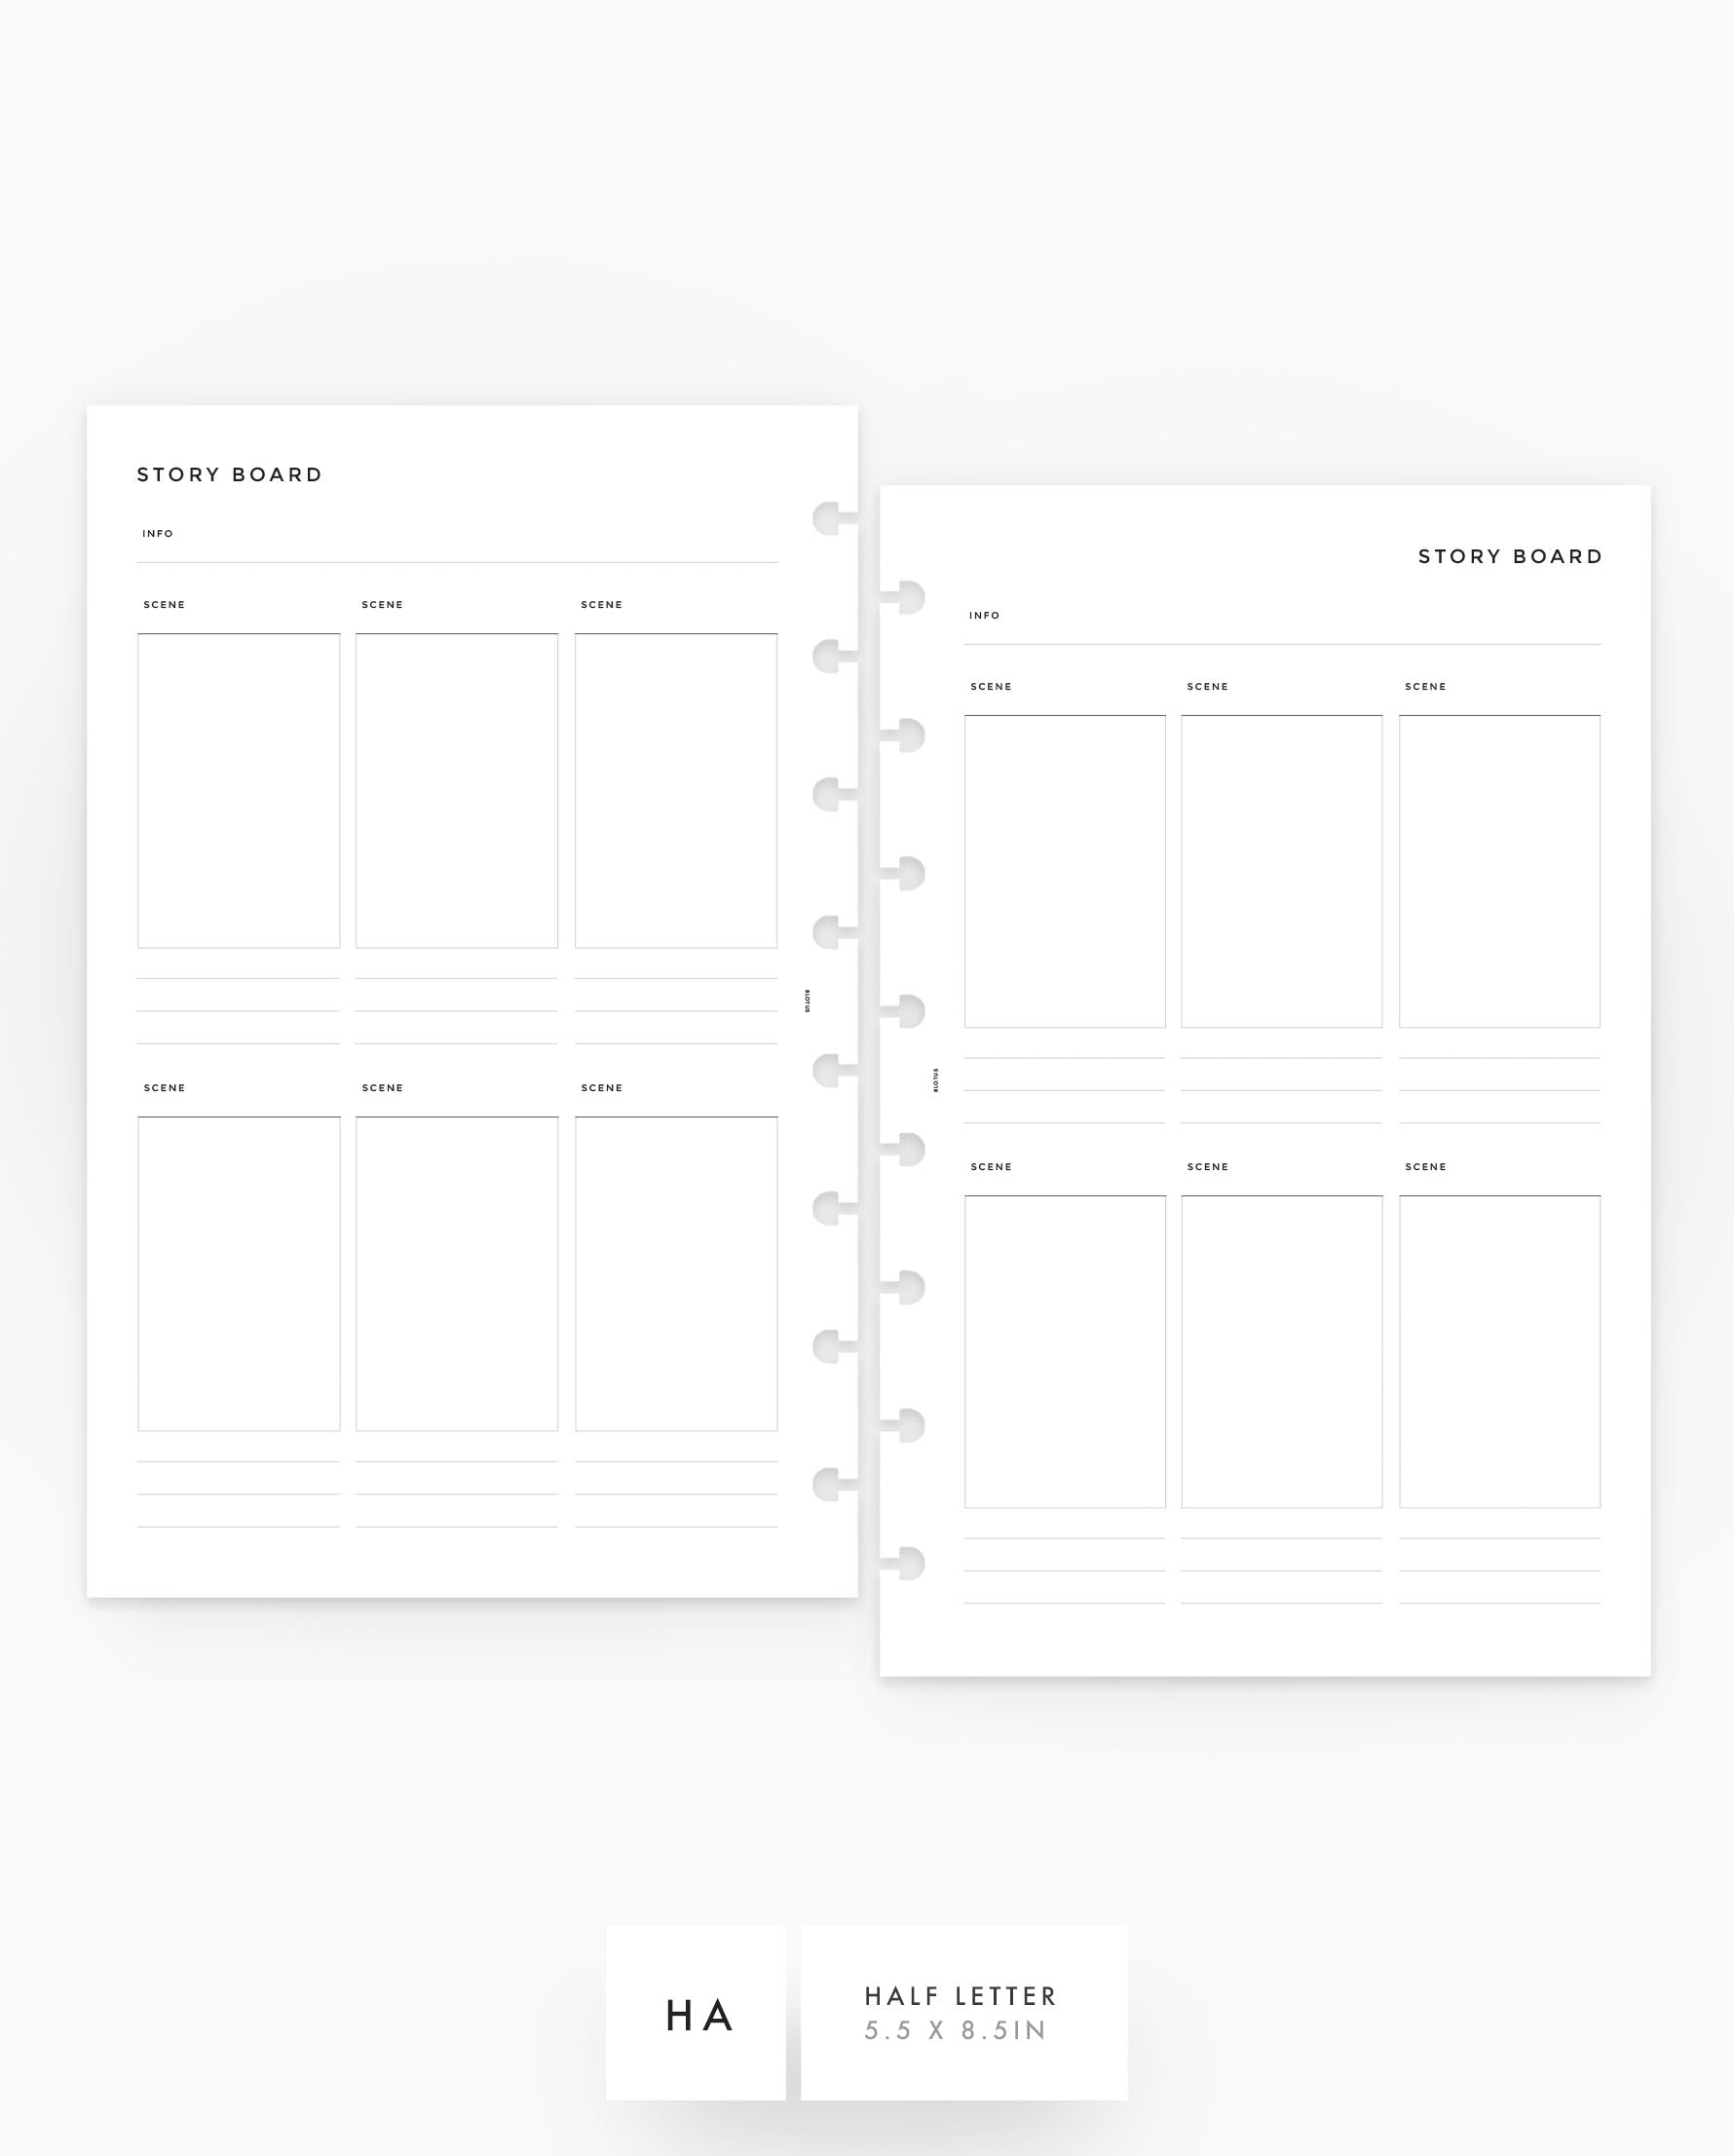 MN228 - Story Board - Vertical - Planner Inserts